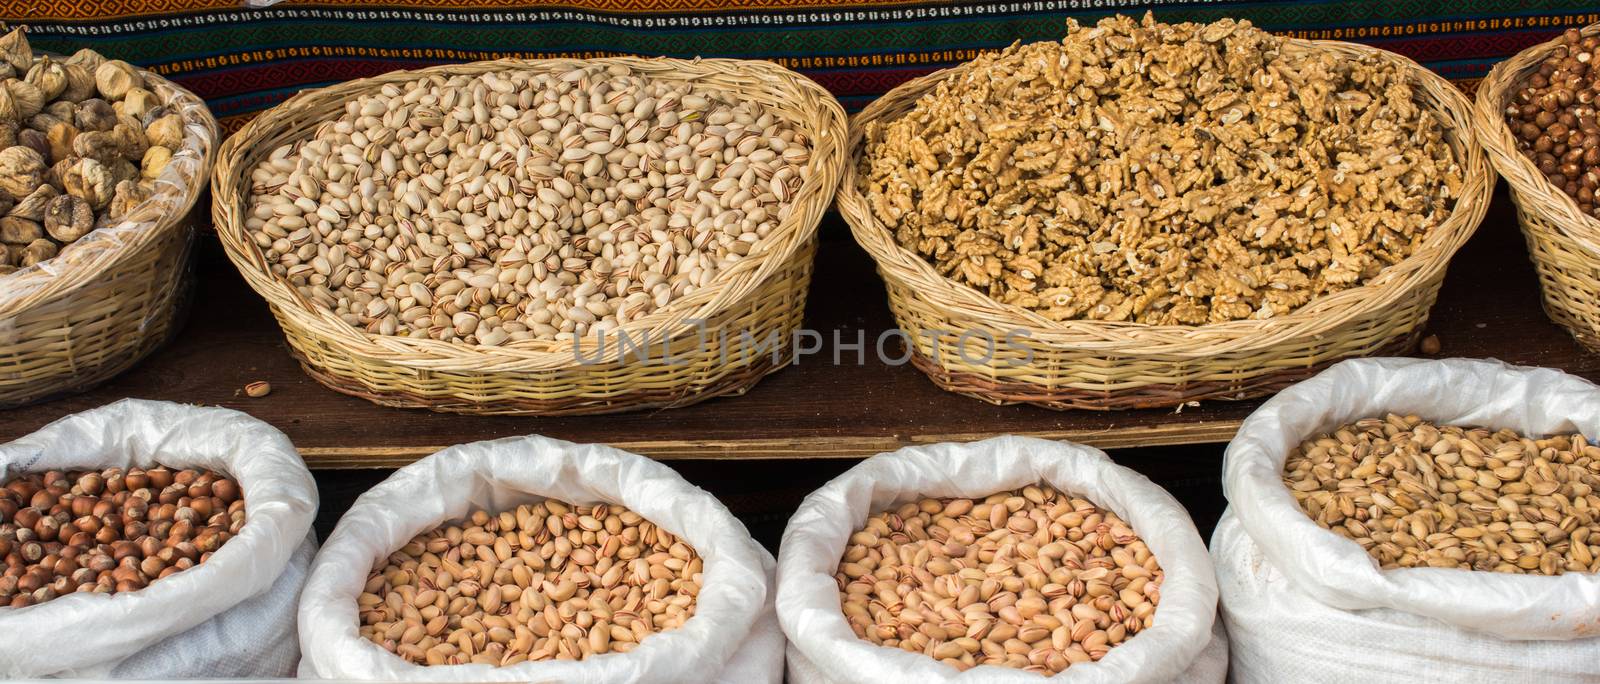 Walnuts, pistachios and hazelnuts in straw baskets and sacks on display